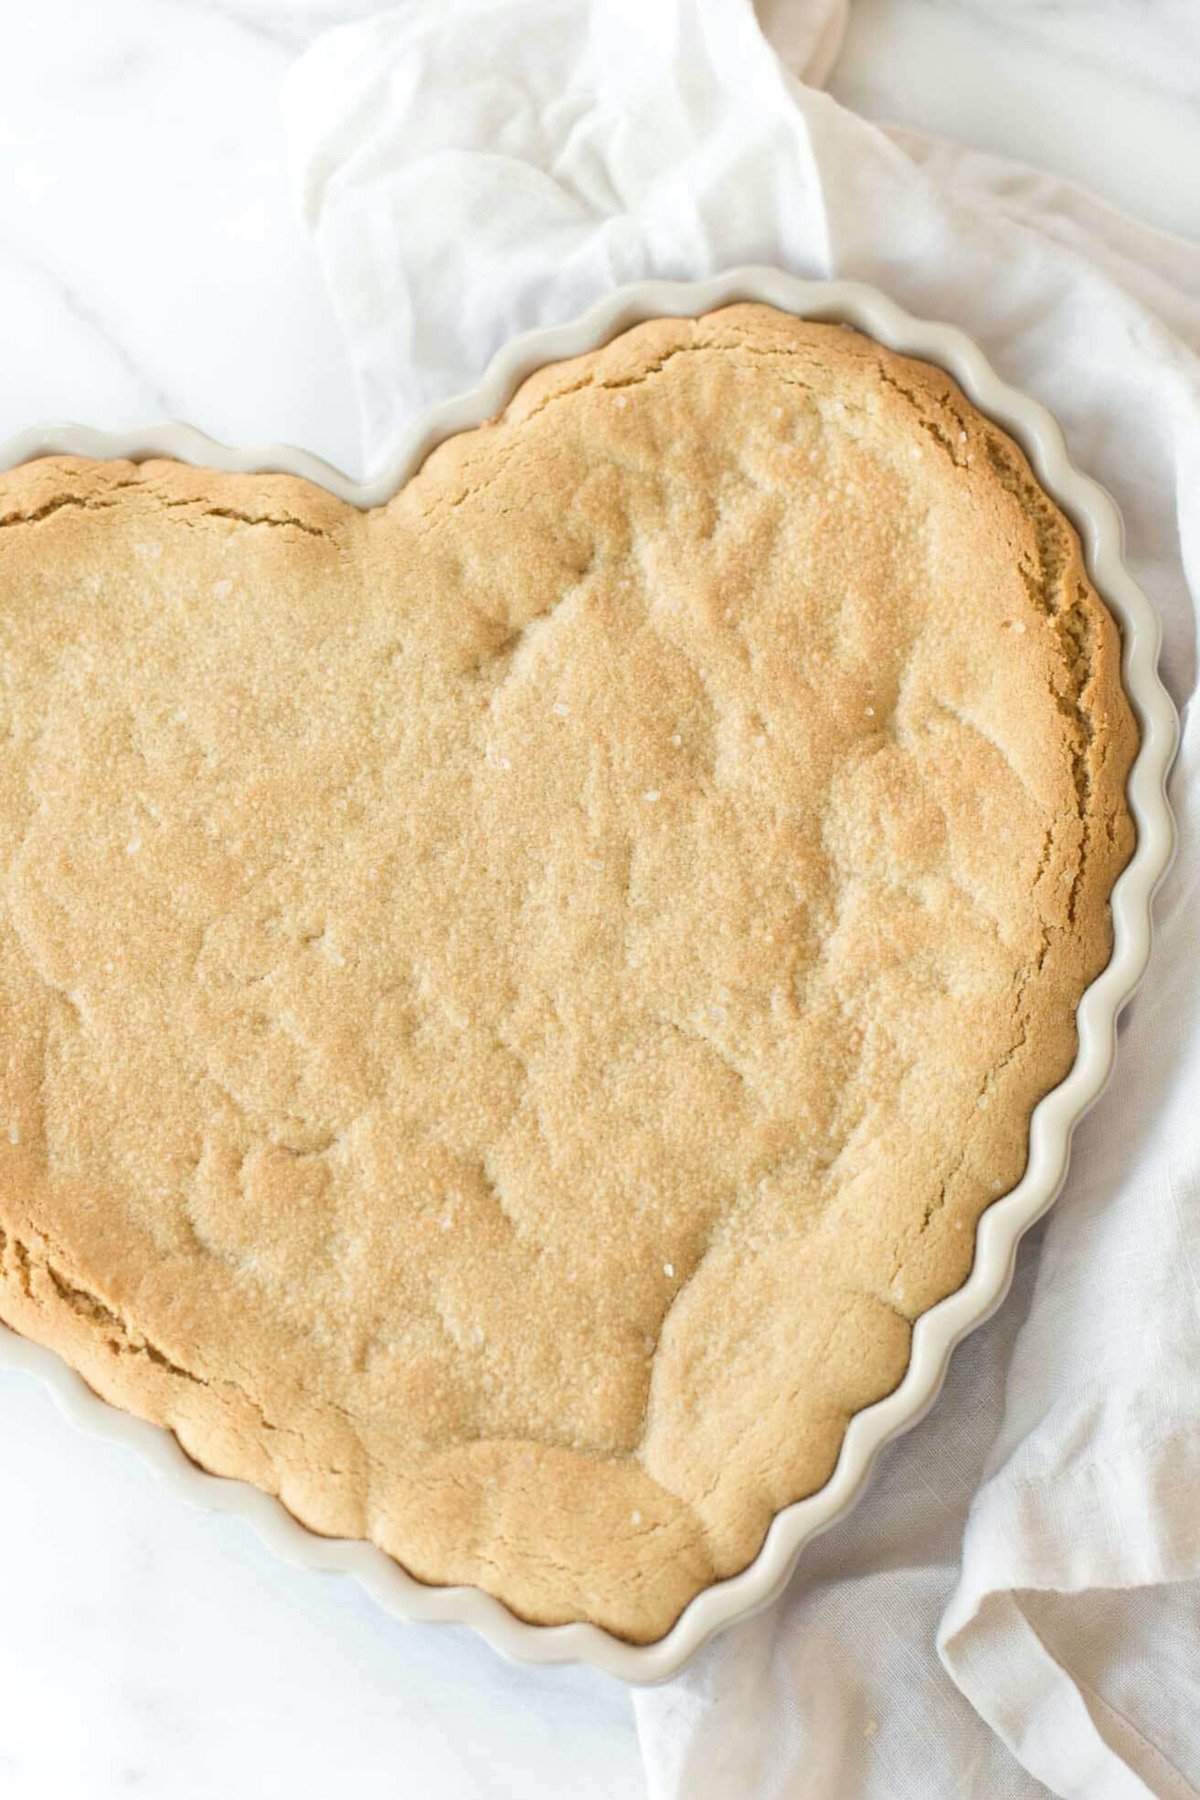 A heart-shaped peanut butter cookie in a white dish.